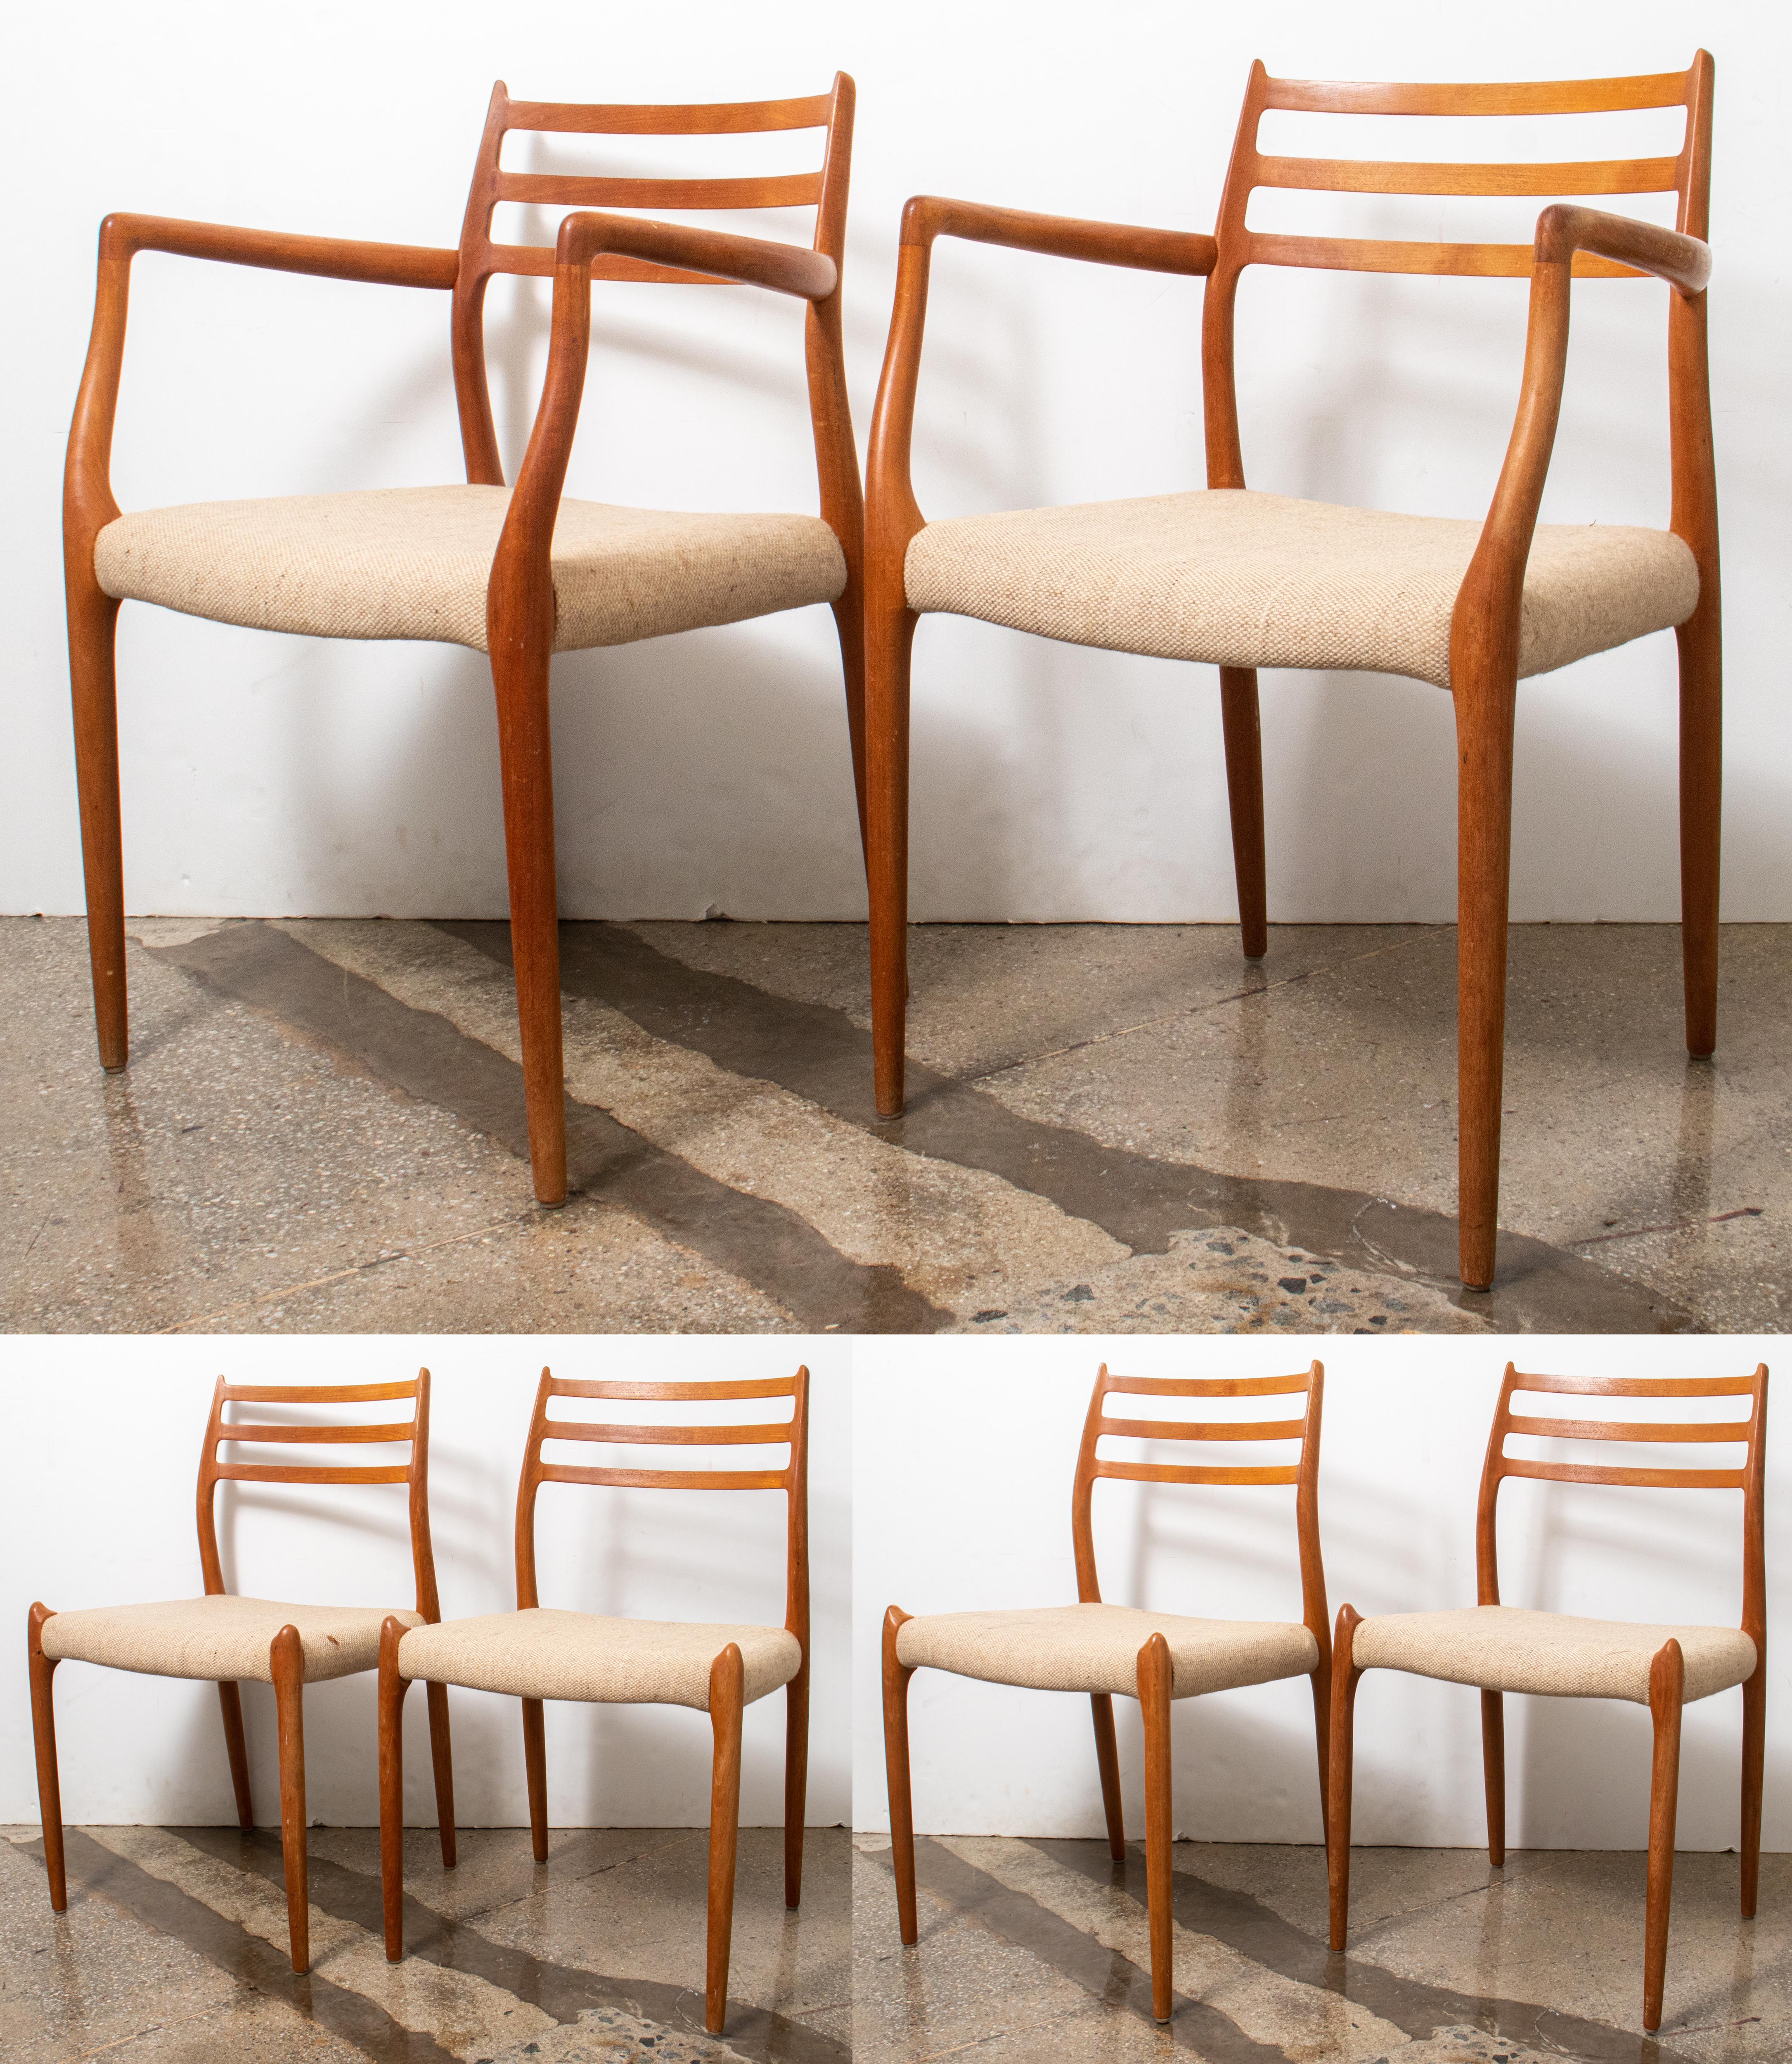 20th Century Niels Moller Danish Modern Dining Chairs, 6